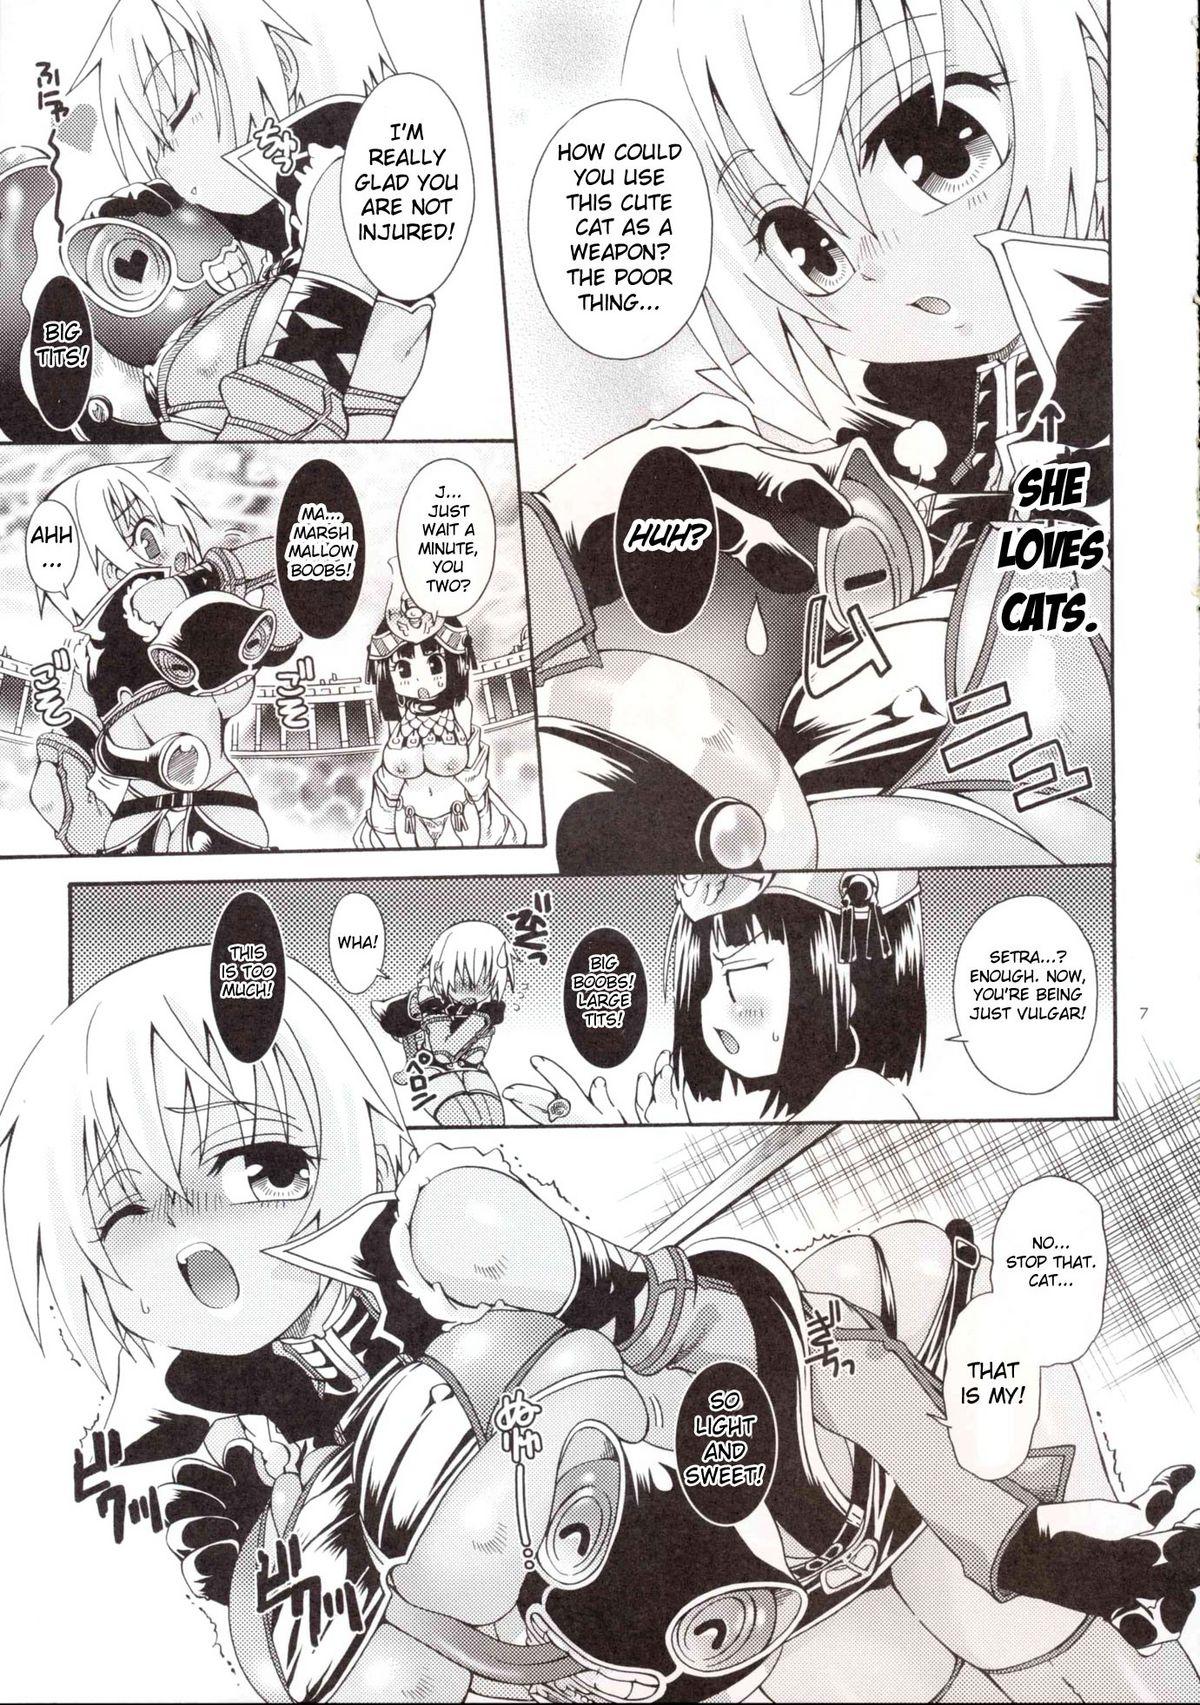 Jerking Cat Fight Over Drive - Queens blade Hardsex - Page 6